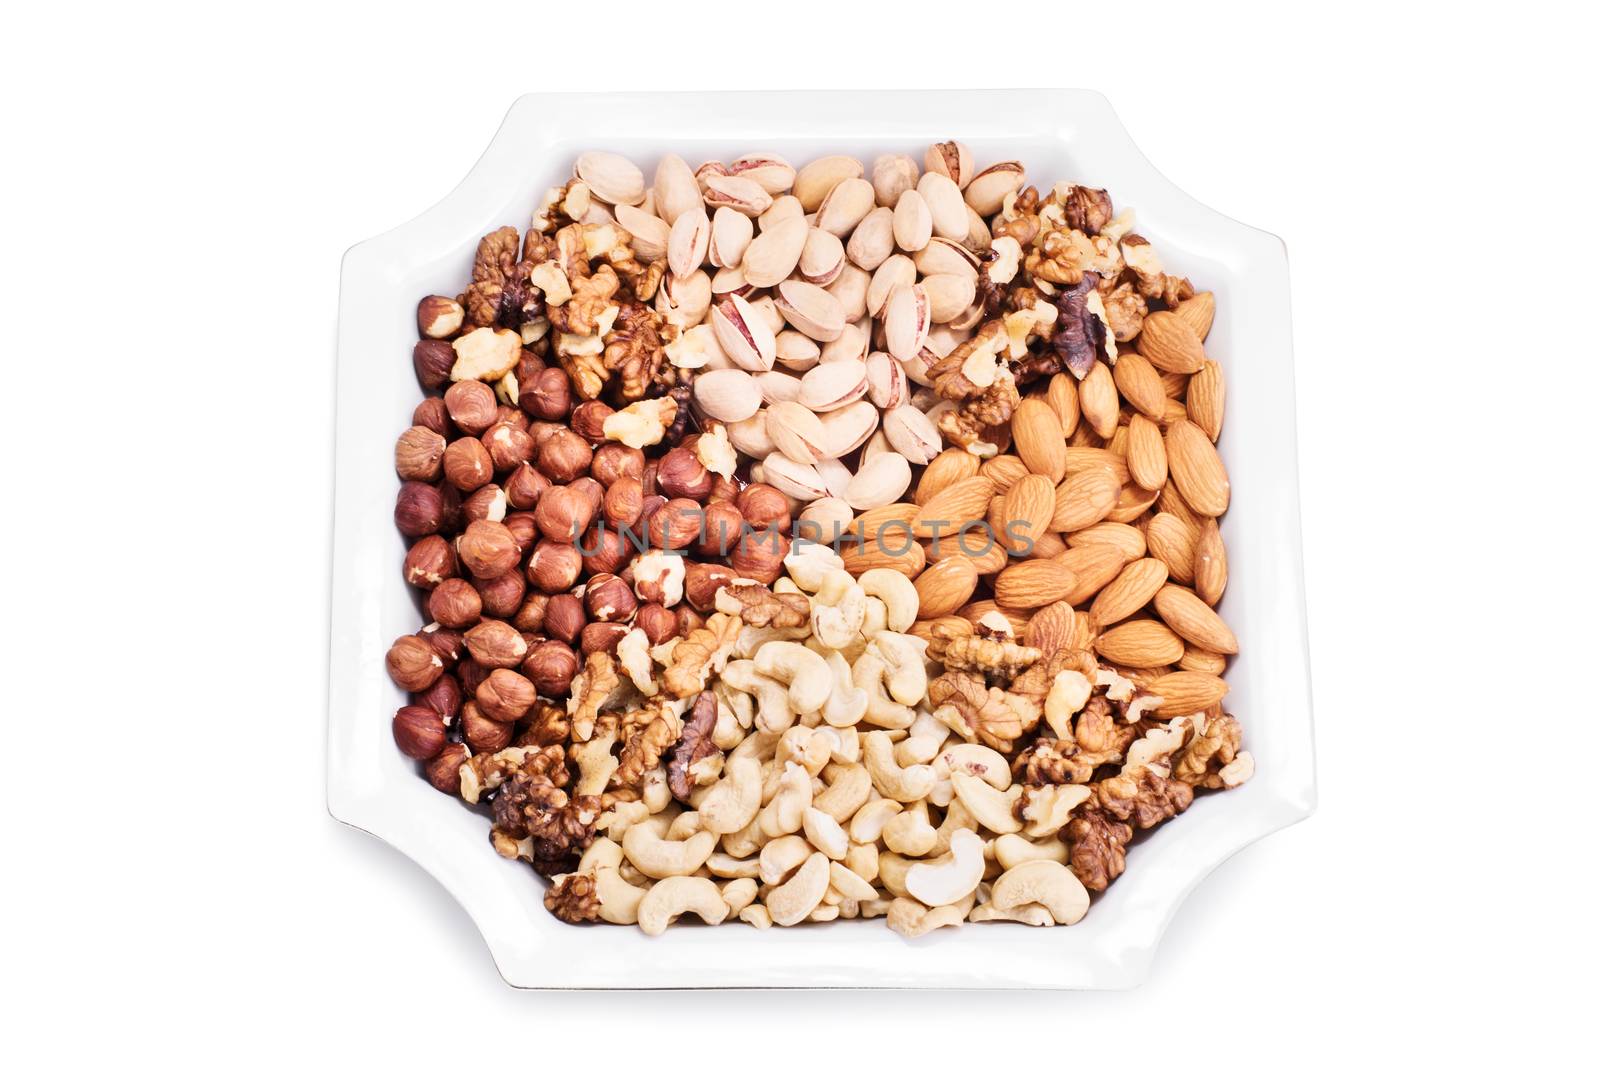 Top view of a mixture of almonds, hazelnuts, walnuts, cashews and pistachios on a ceramic plate, isolated on white background.